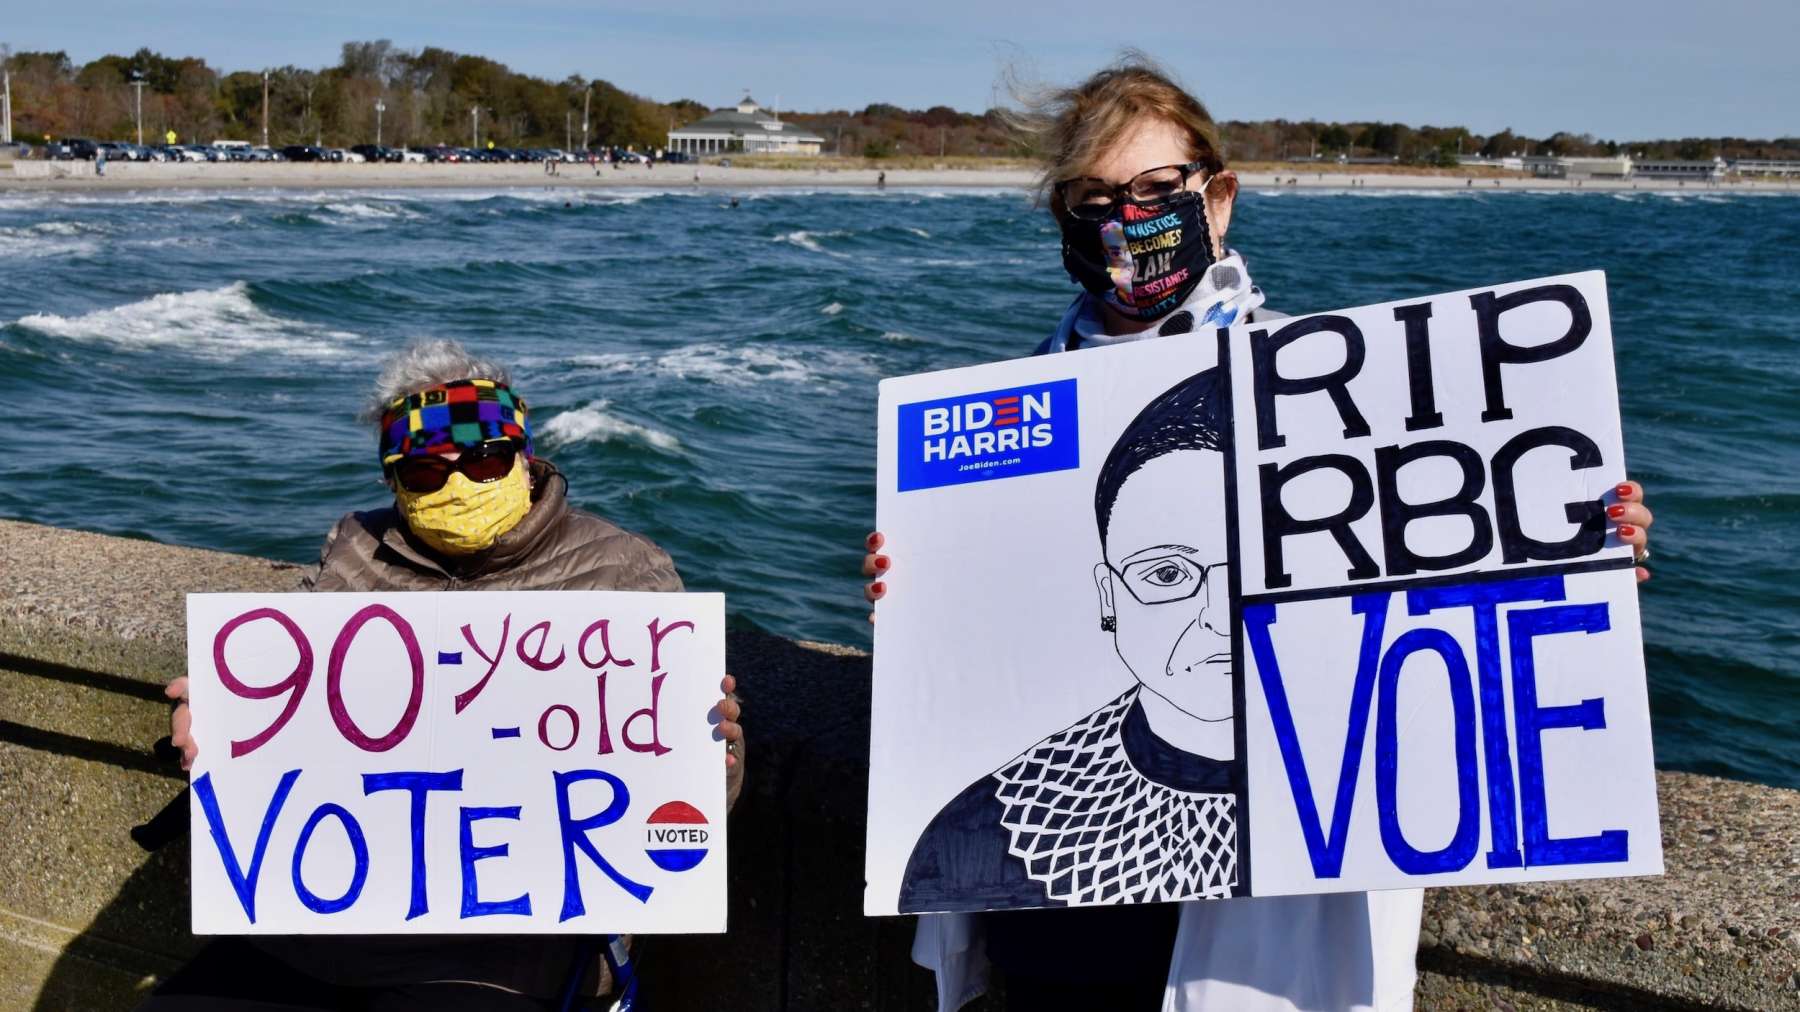 Rhode Island News: Photos from the Women’s March 2020 event at the Narragansett Sea Wall